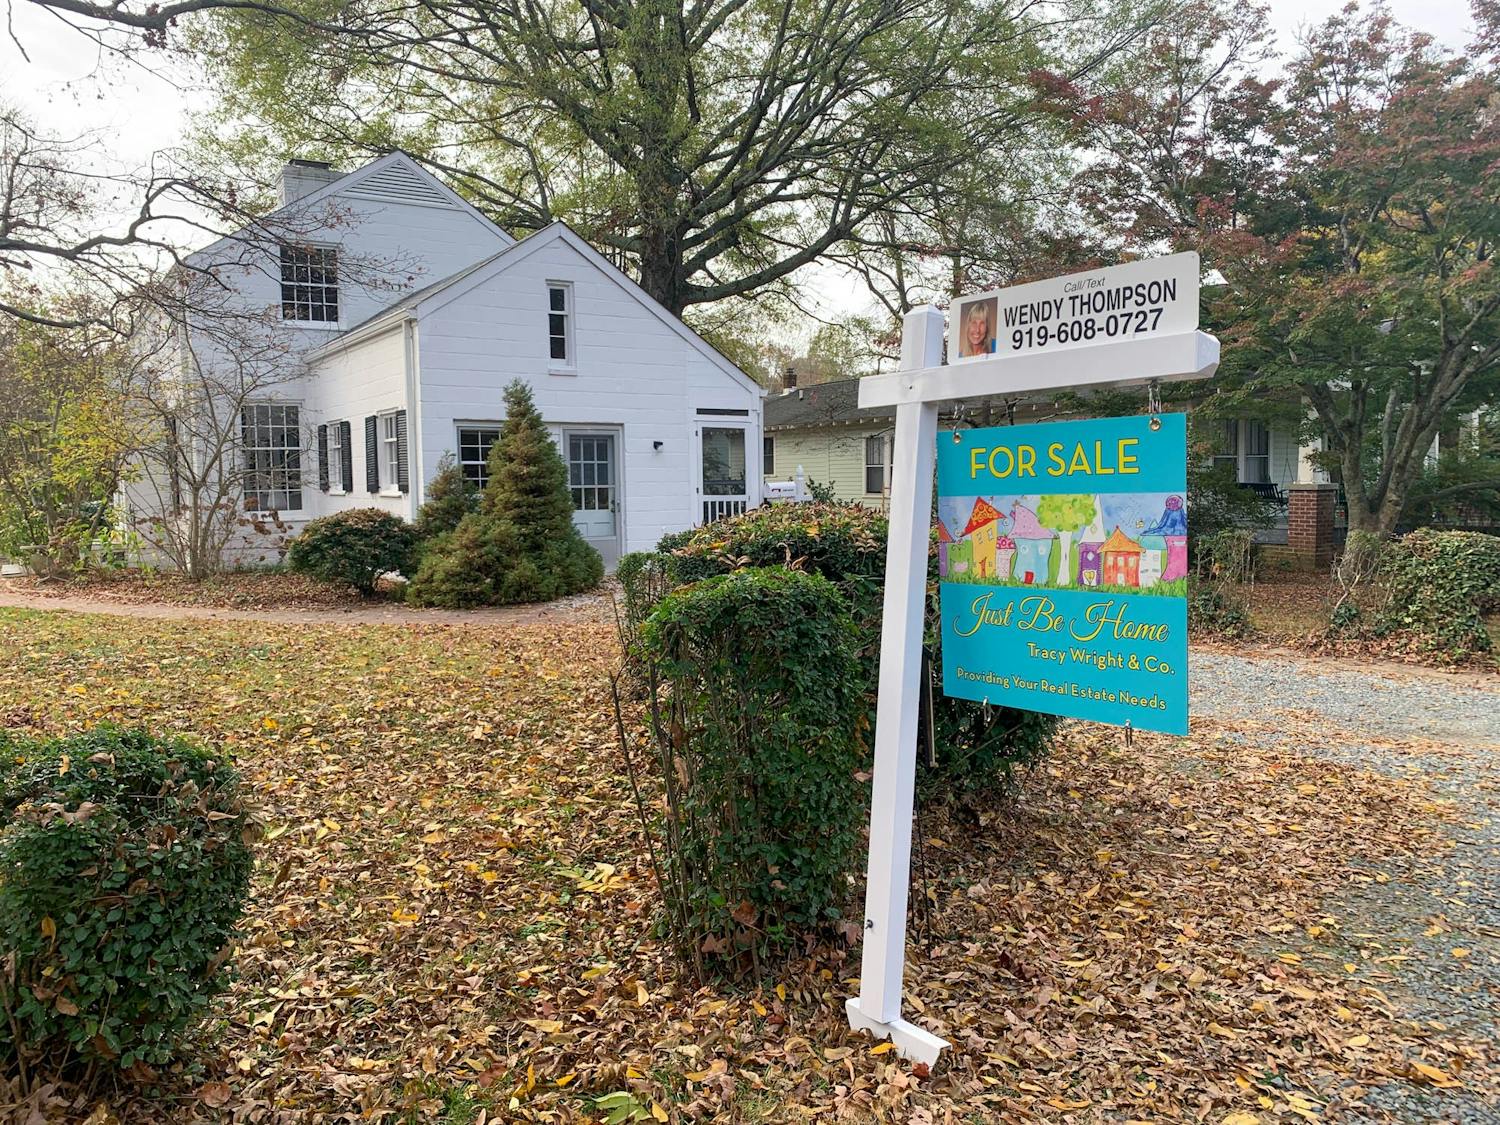 A home for sale sign stands on East Patterson Place in Chapel Hill on Nov. 10, 2022. Chapel Hill needs more housing as interest rates and housing prices are increasing.